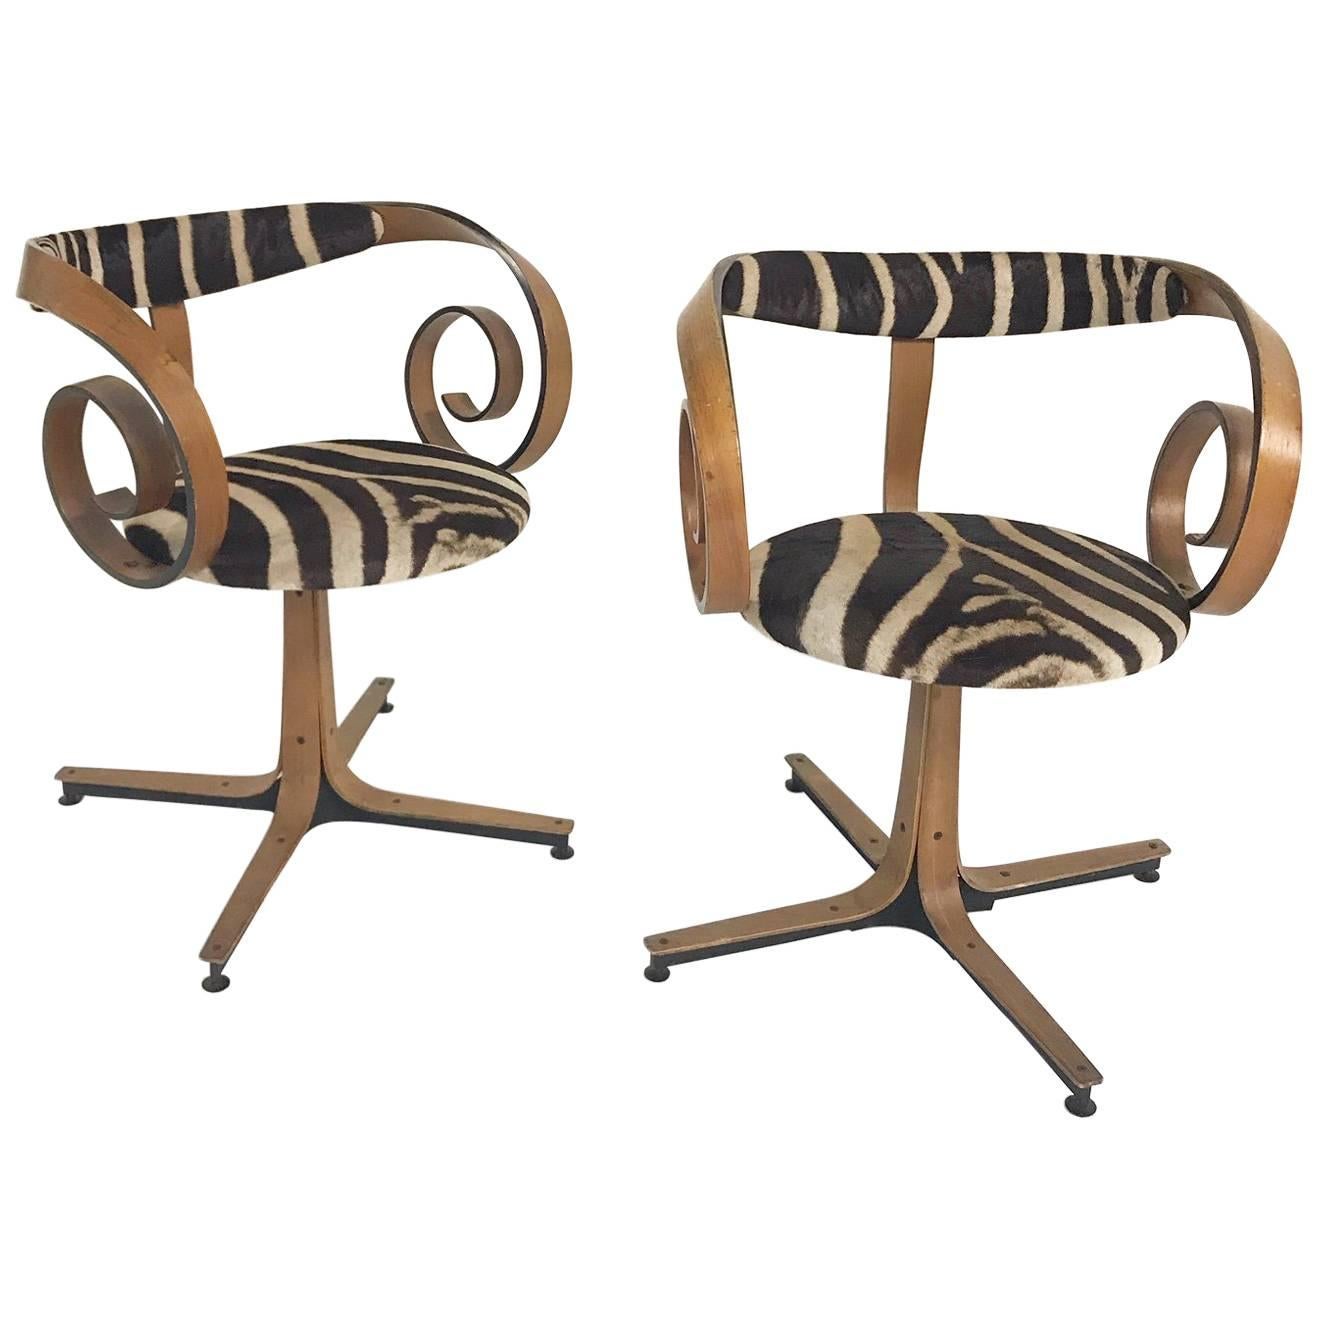 George Mulhauser for Plycraft Sultana Chairs Restored in Zebra Hide, Pair